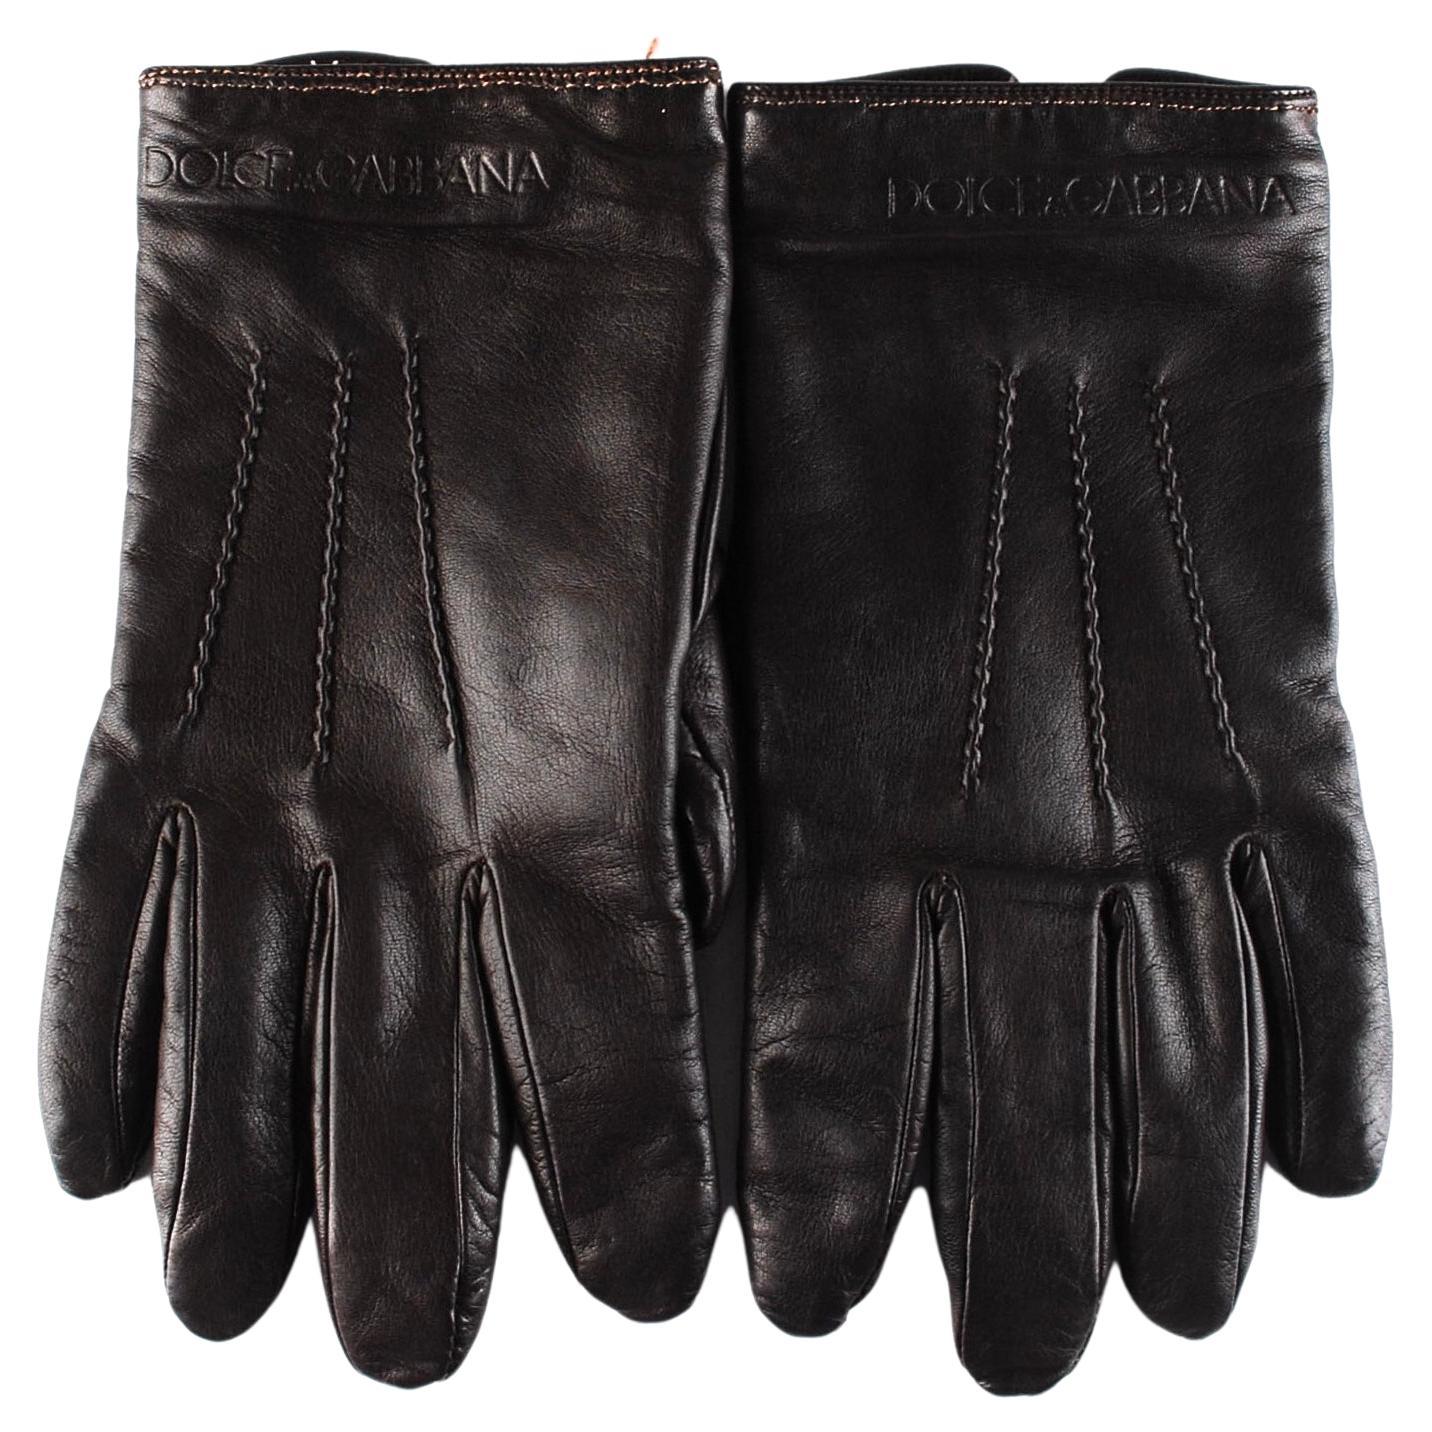 Dolce&Gabbana Cashmere Lined Men Leather Gloves Size 9 (S060)